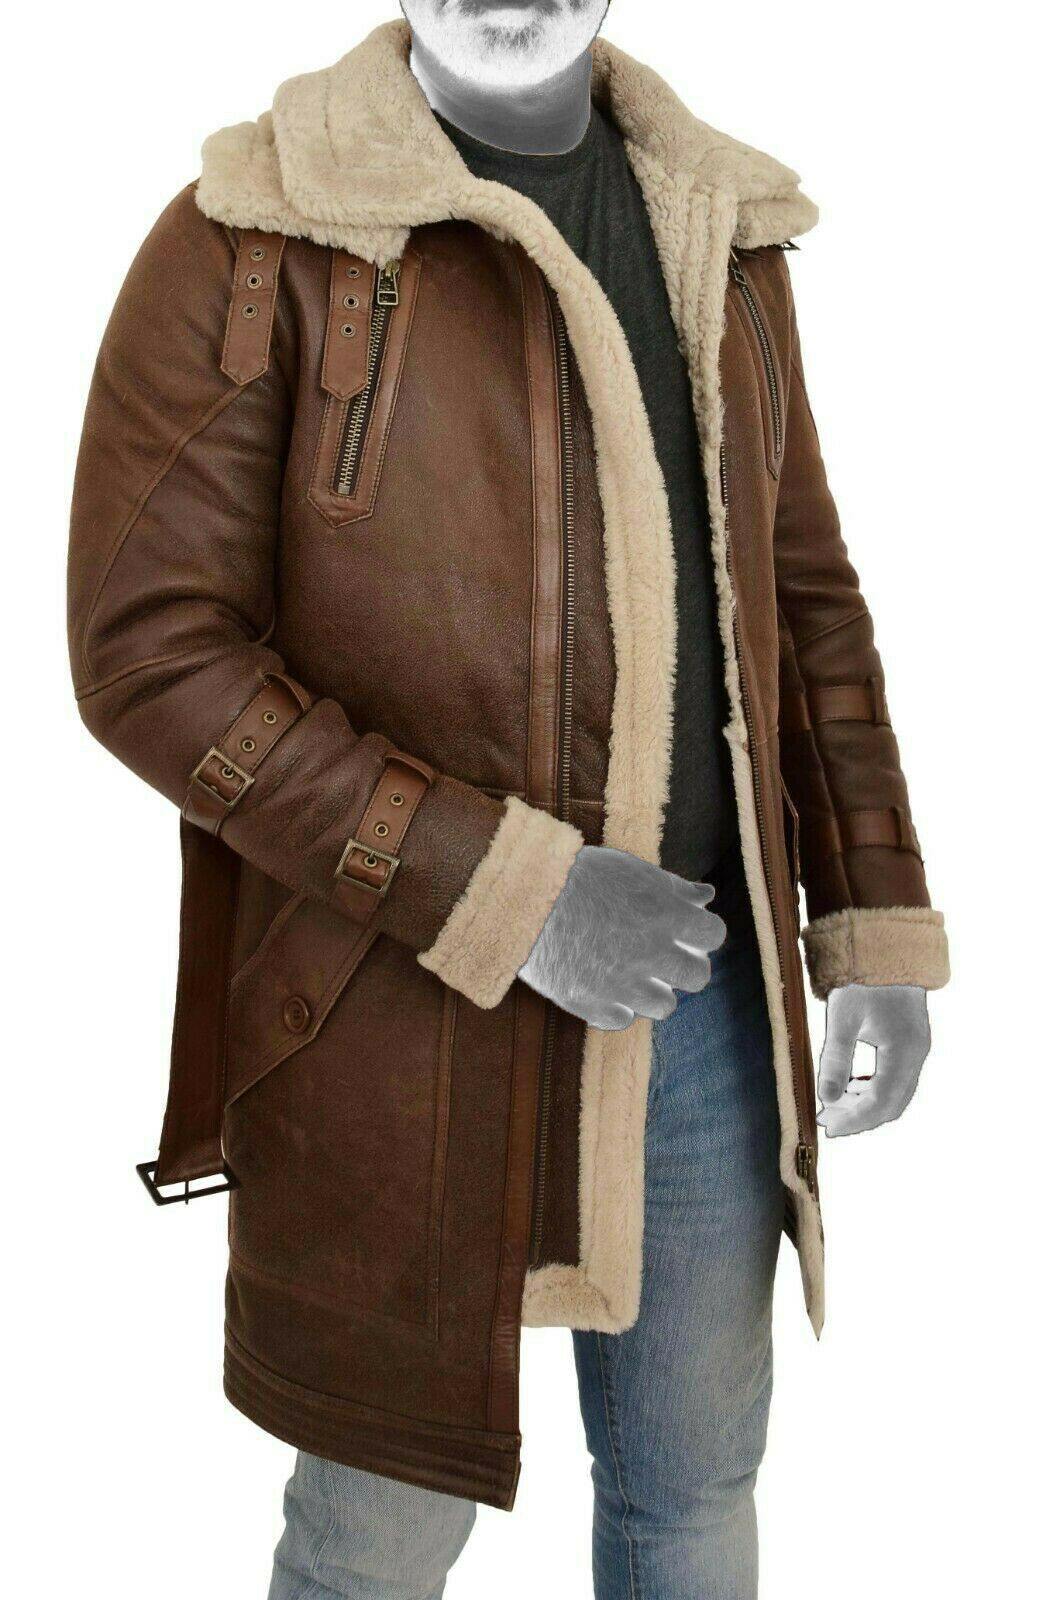 Spine Spark Men's Shearling Brown Duffle Coat Leather Jacket